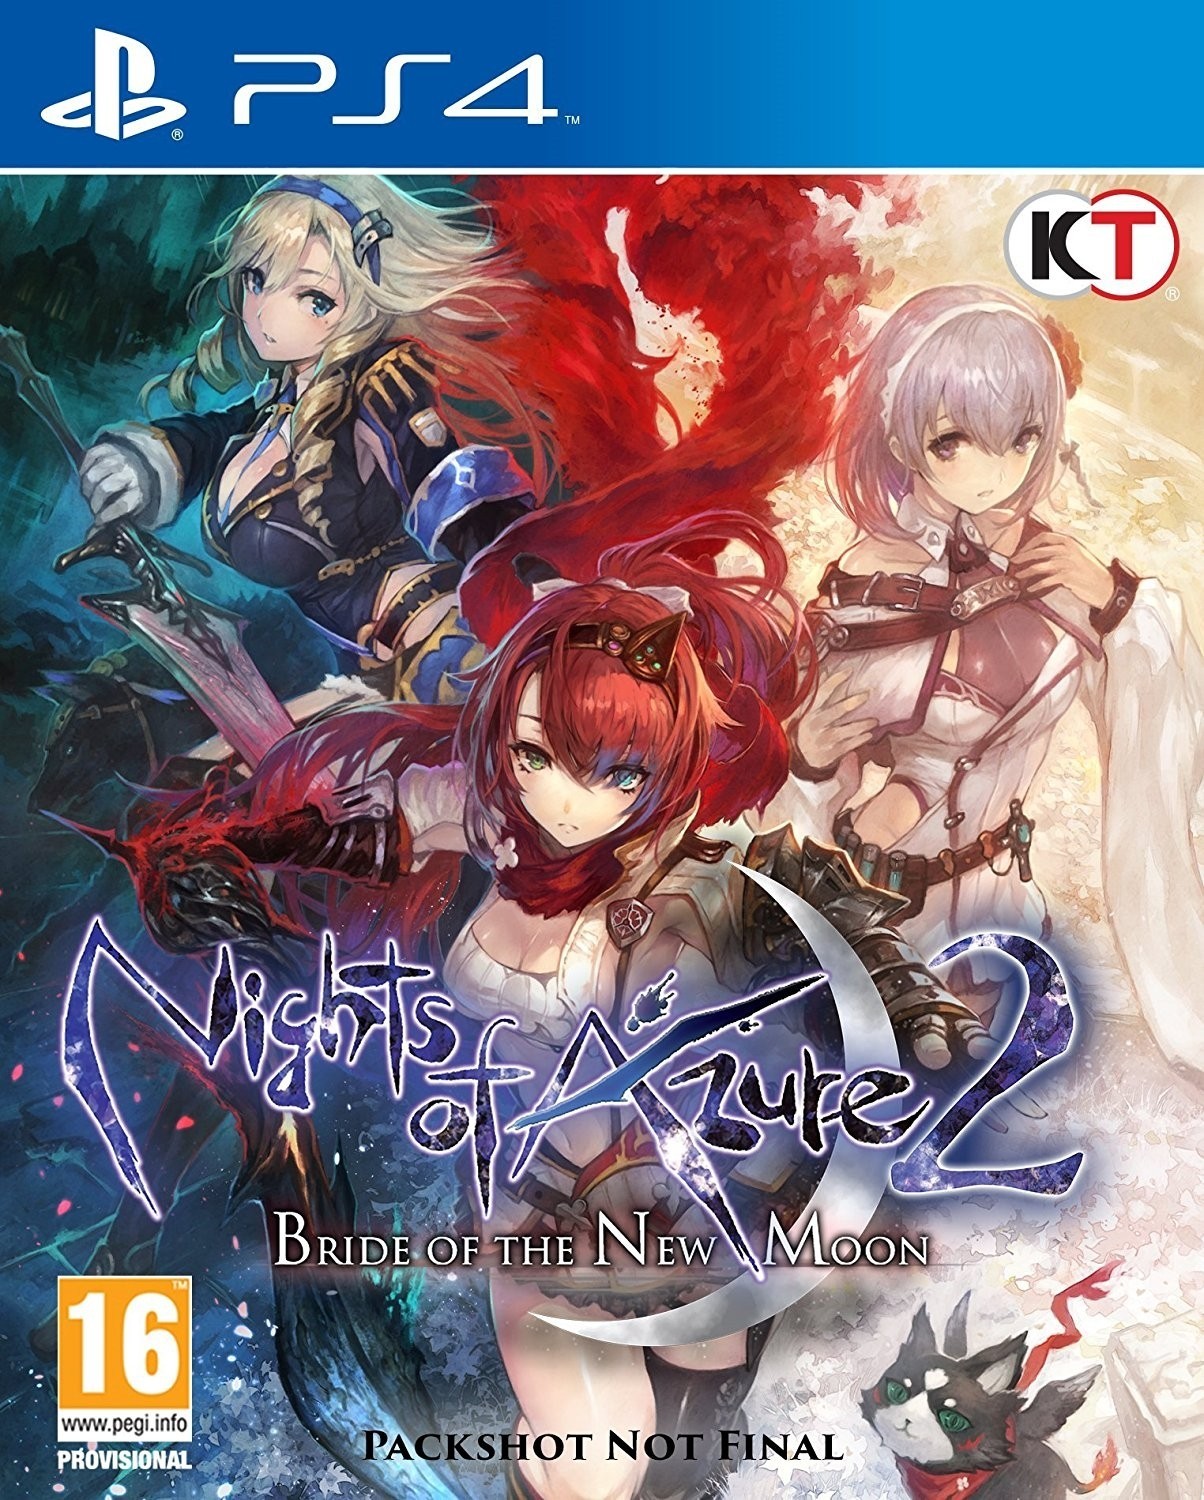 Nights of Azure 2: Bride of the New Moon (PS4), Gust